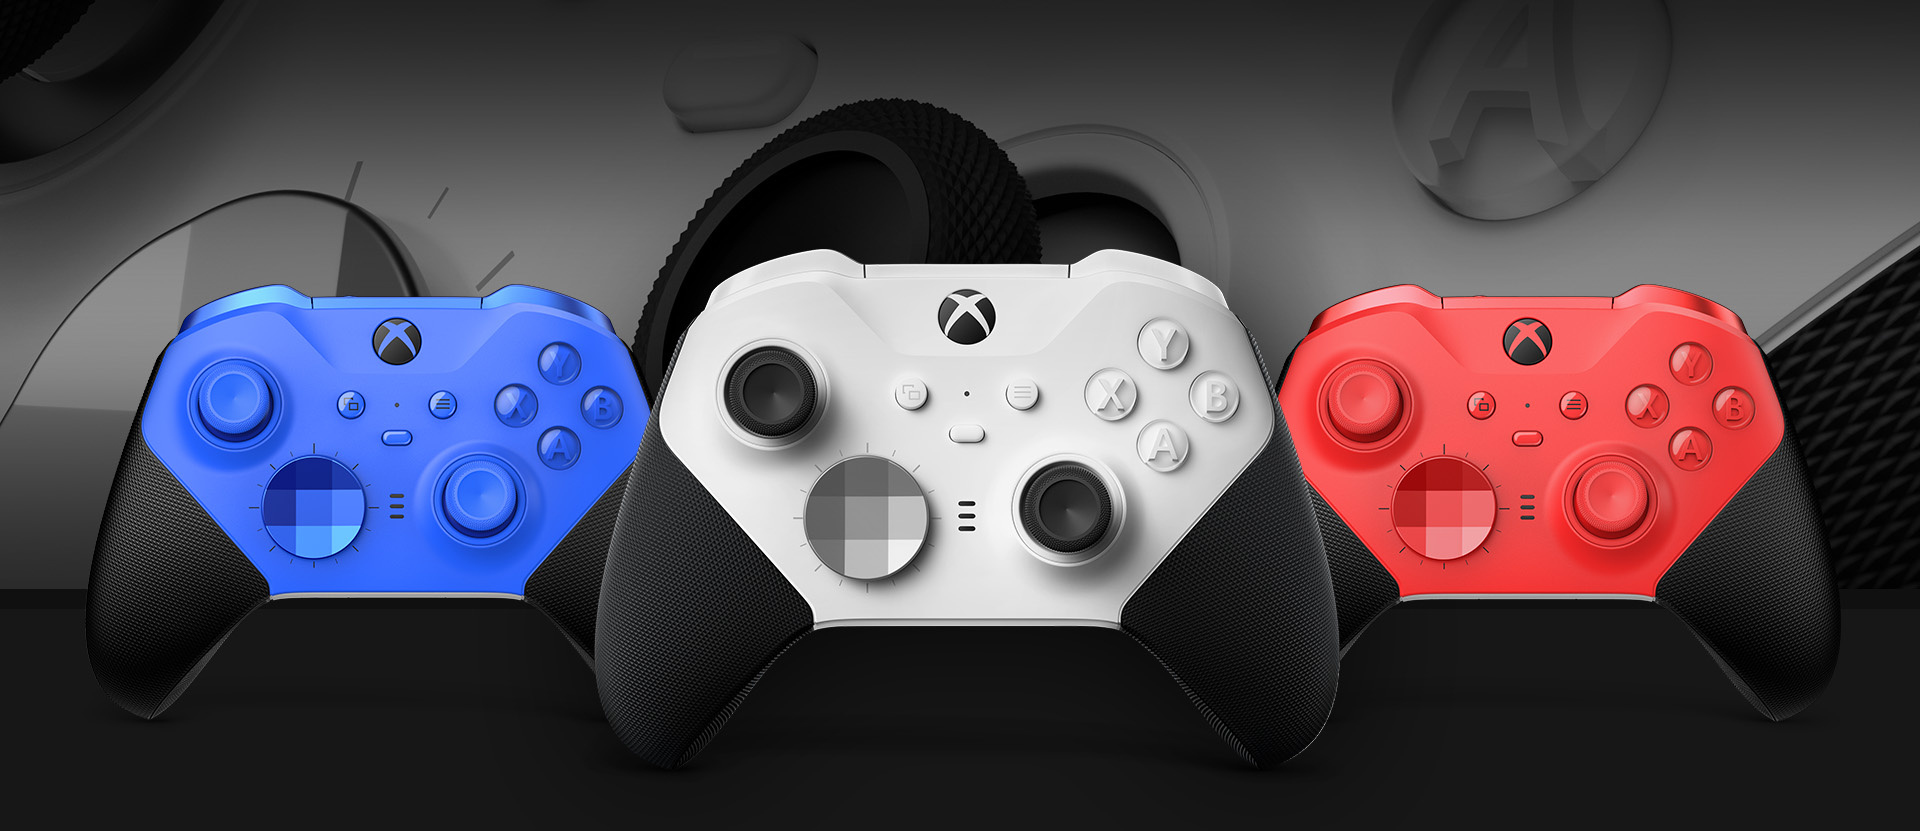 Front view of the Xbox Elite Wireless Controller Series 2 – Core (White) with other colour options shown alongside. A close-up of the controller thumbsticks and textured grip is in the background.